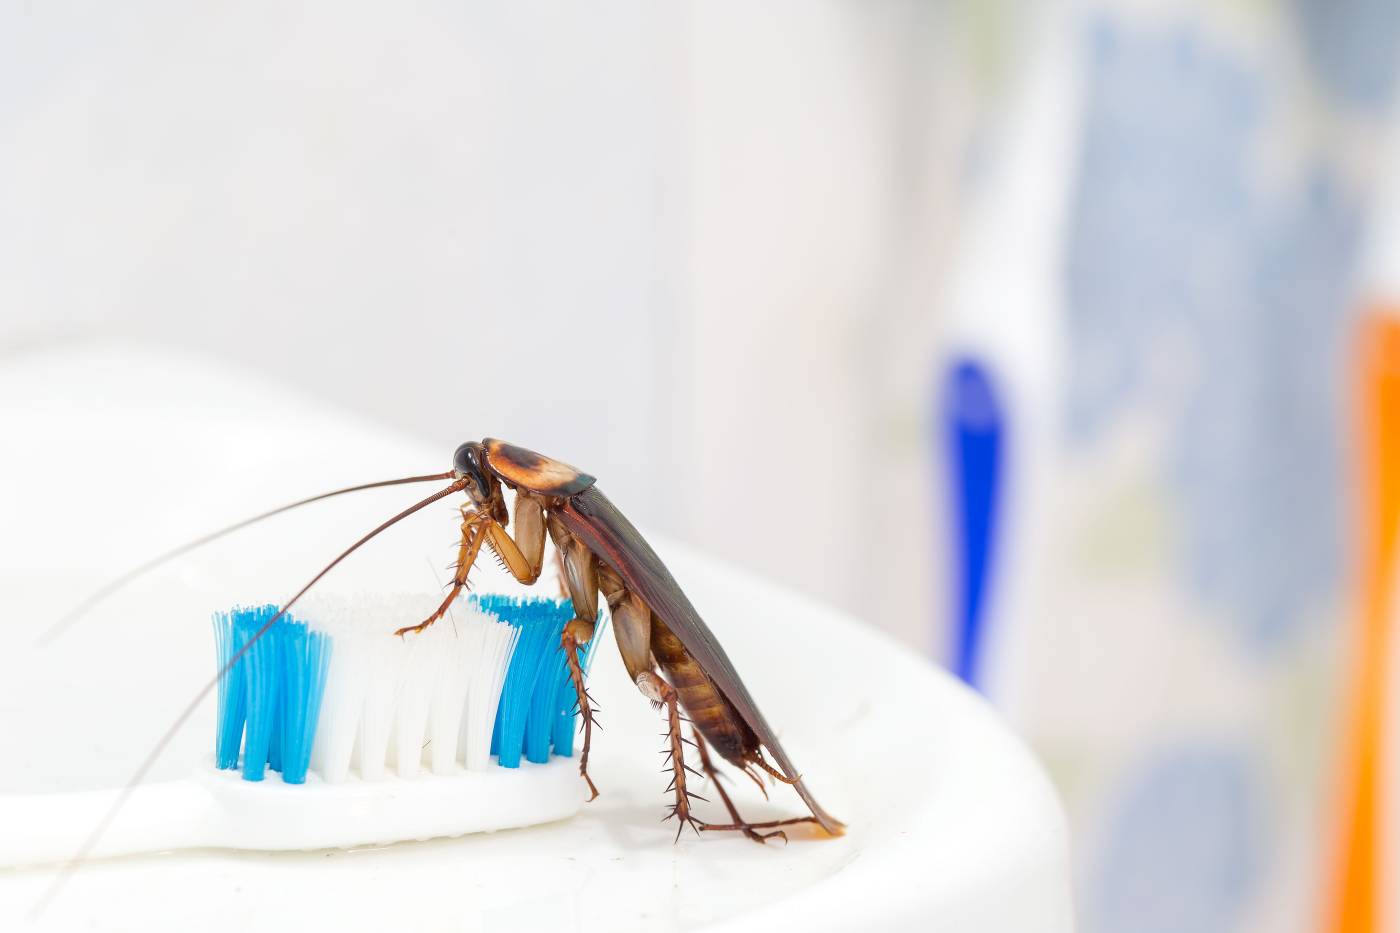 cockroaches are on the toothbrush in the bathroom,